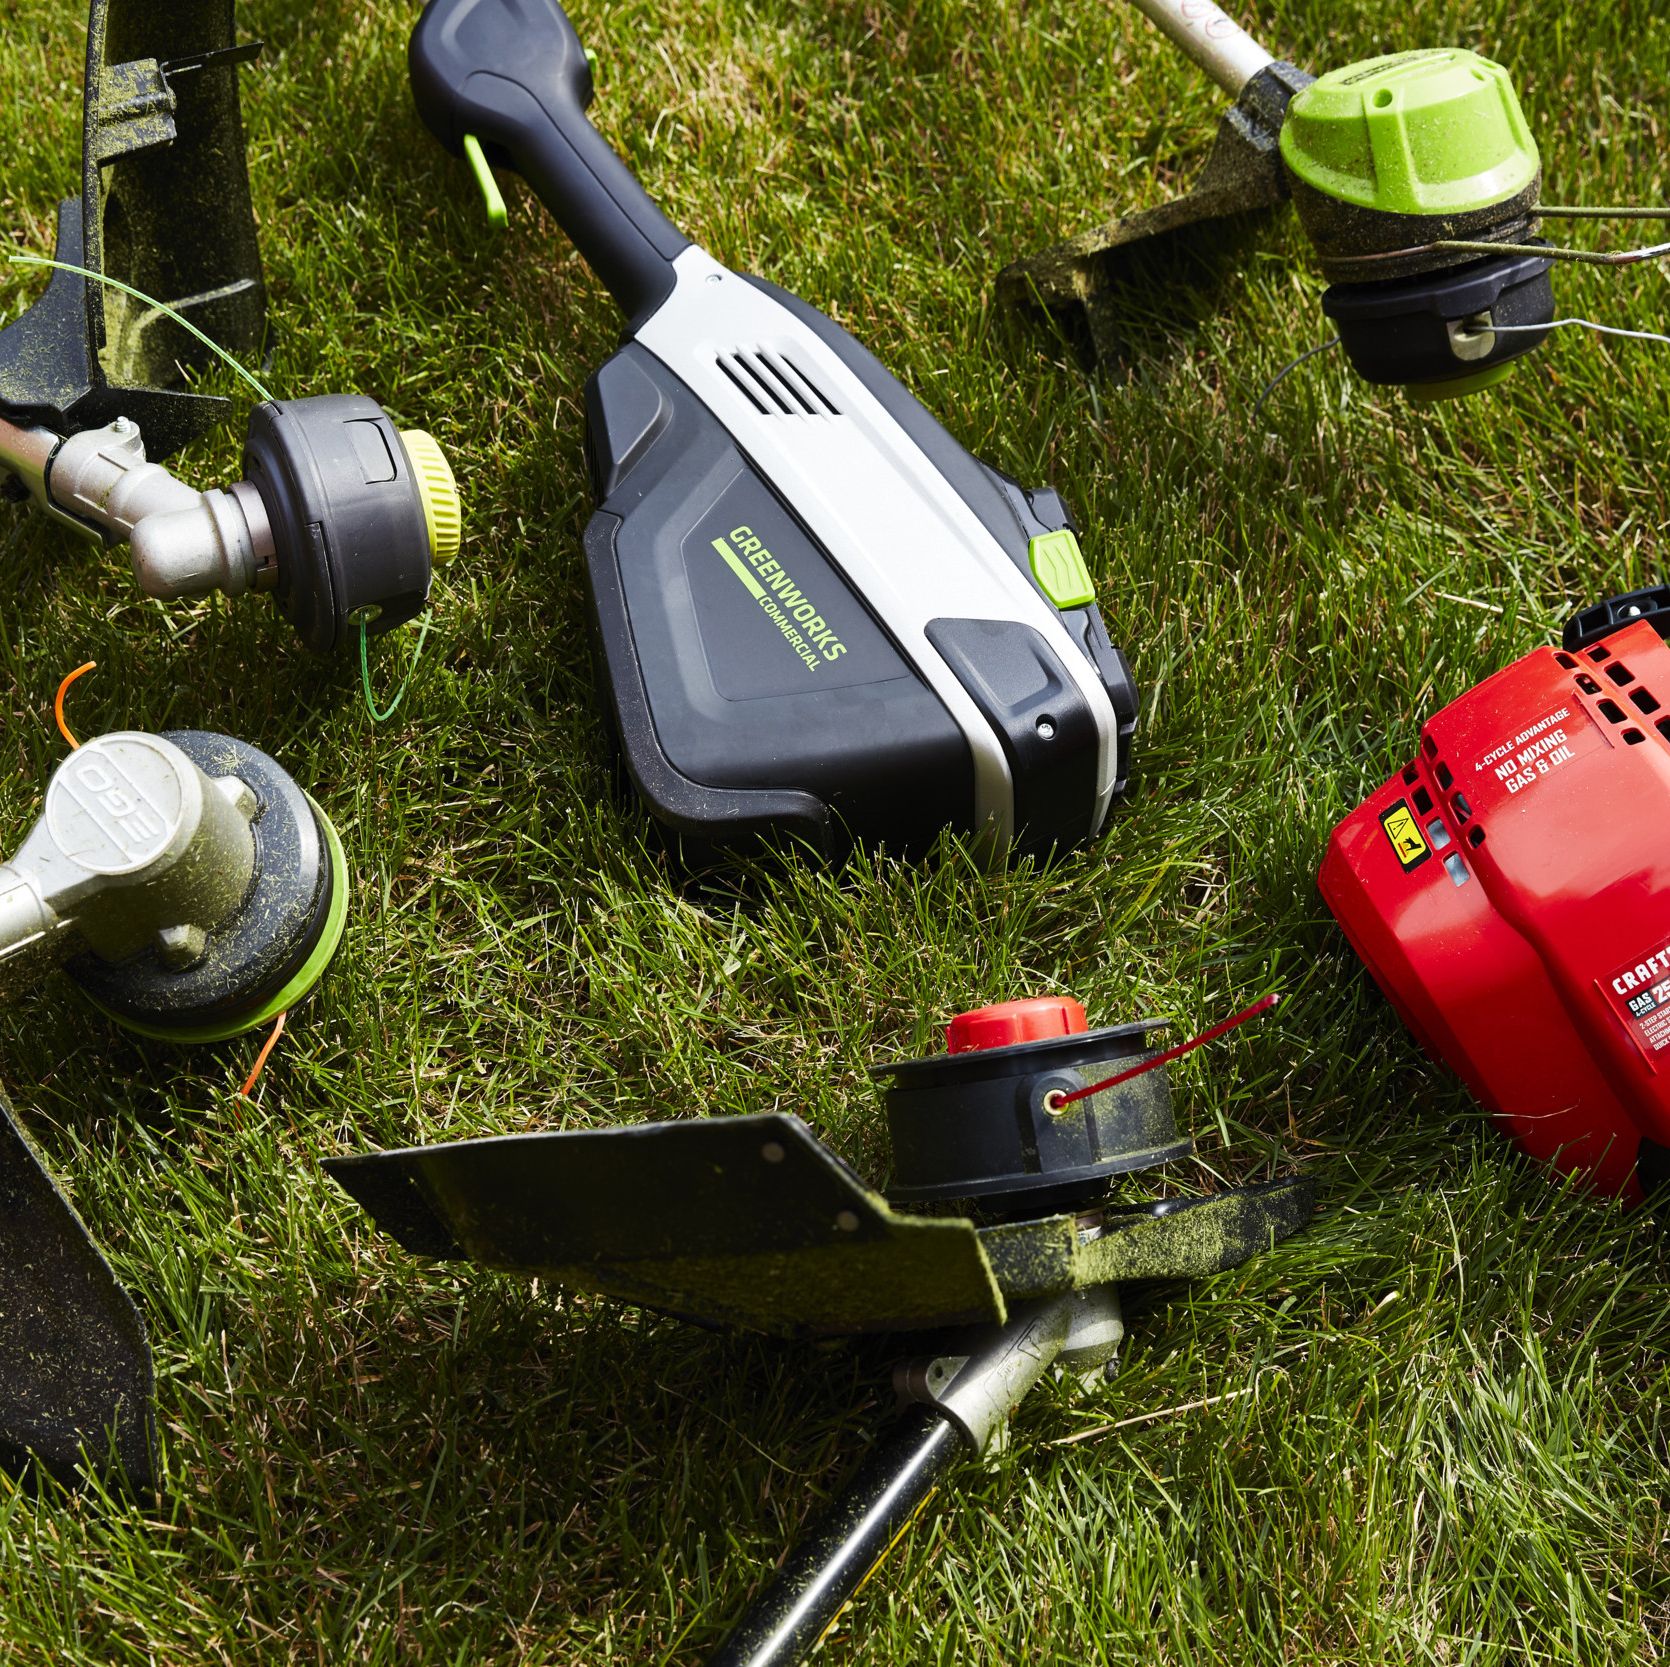 The Best String Trimmers to Get Nice, Crisp Edges On Your Grass